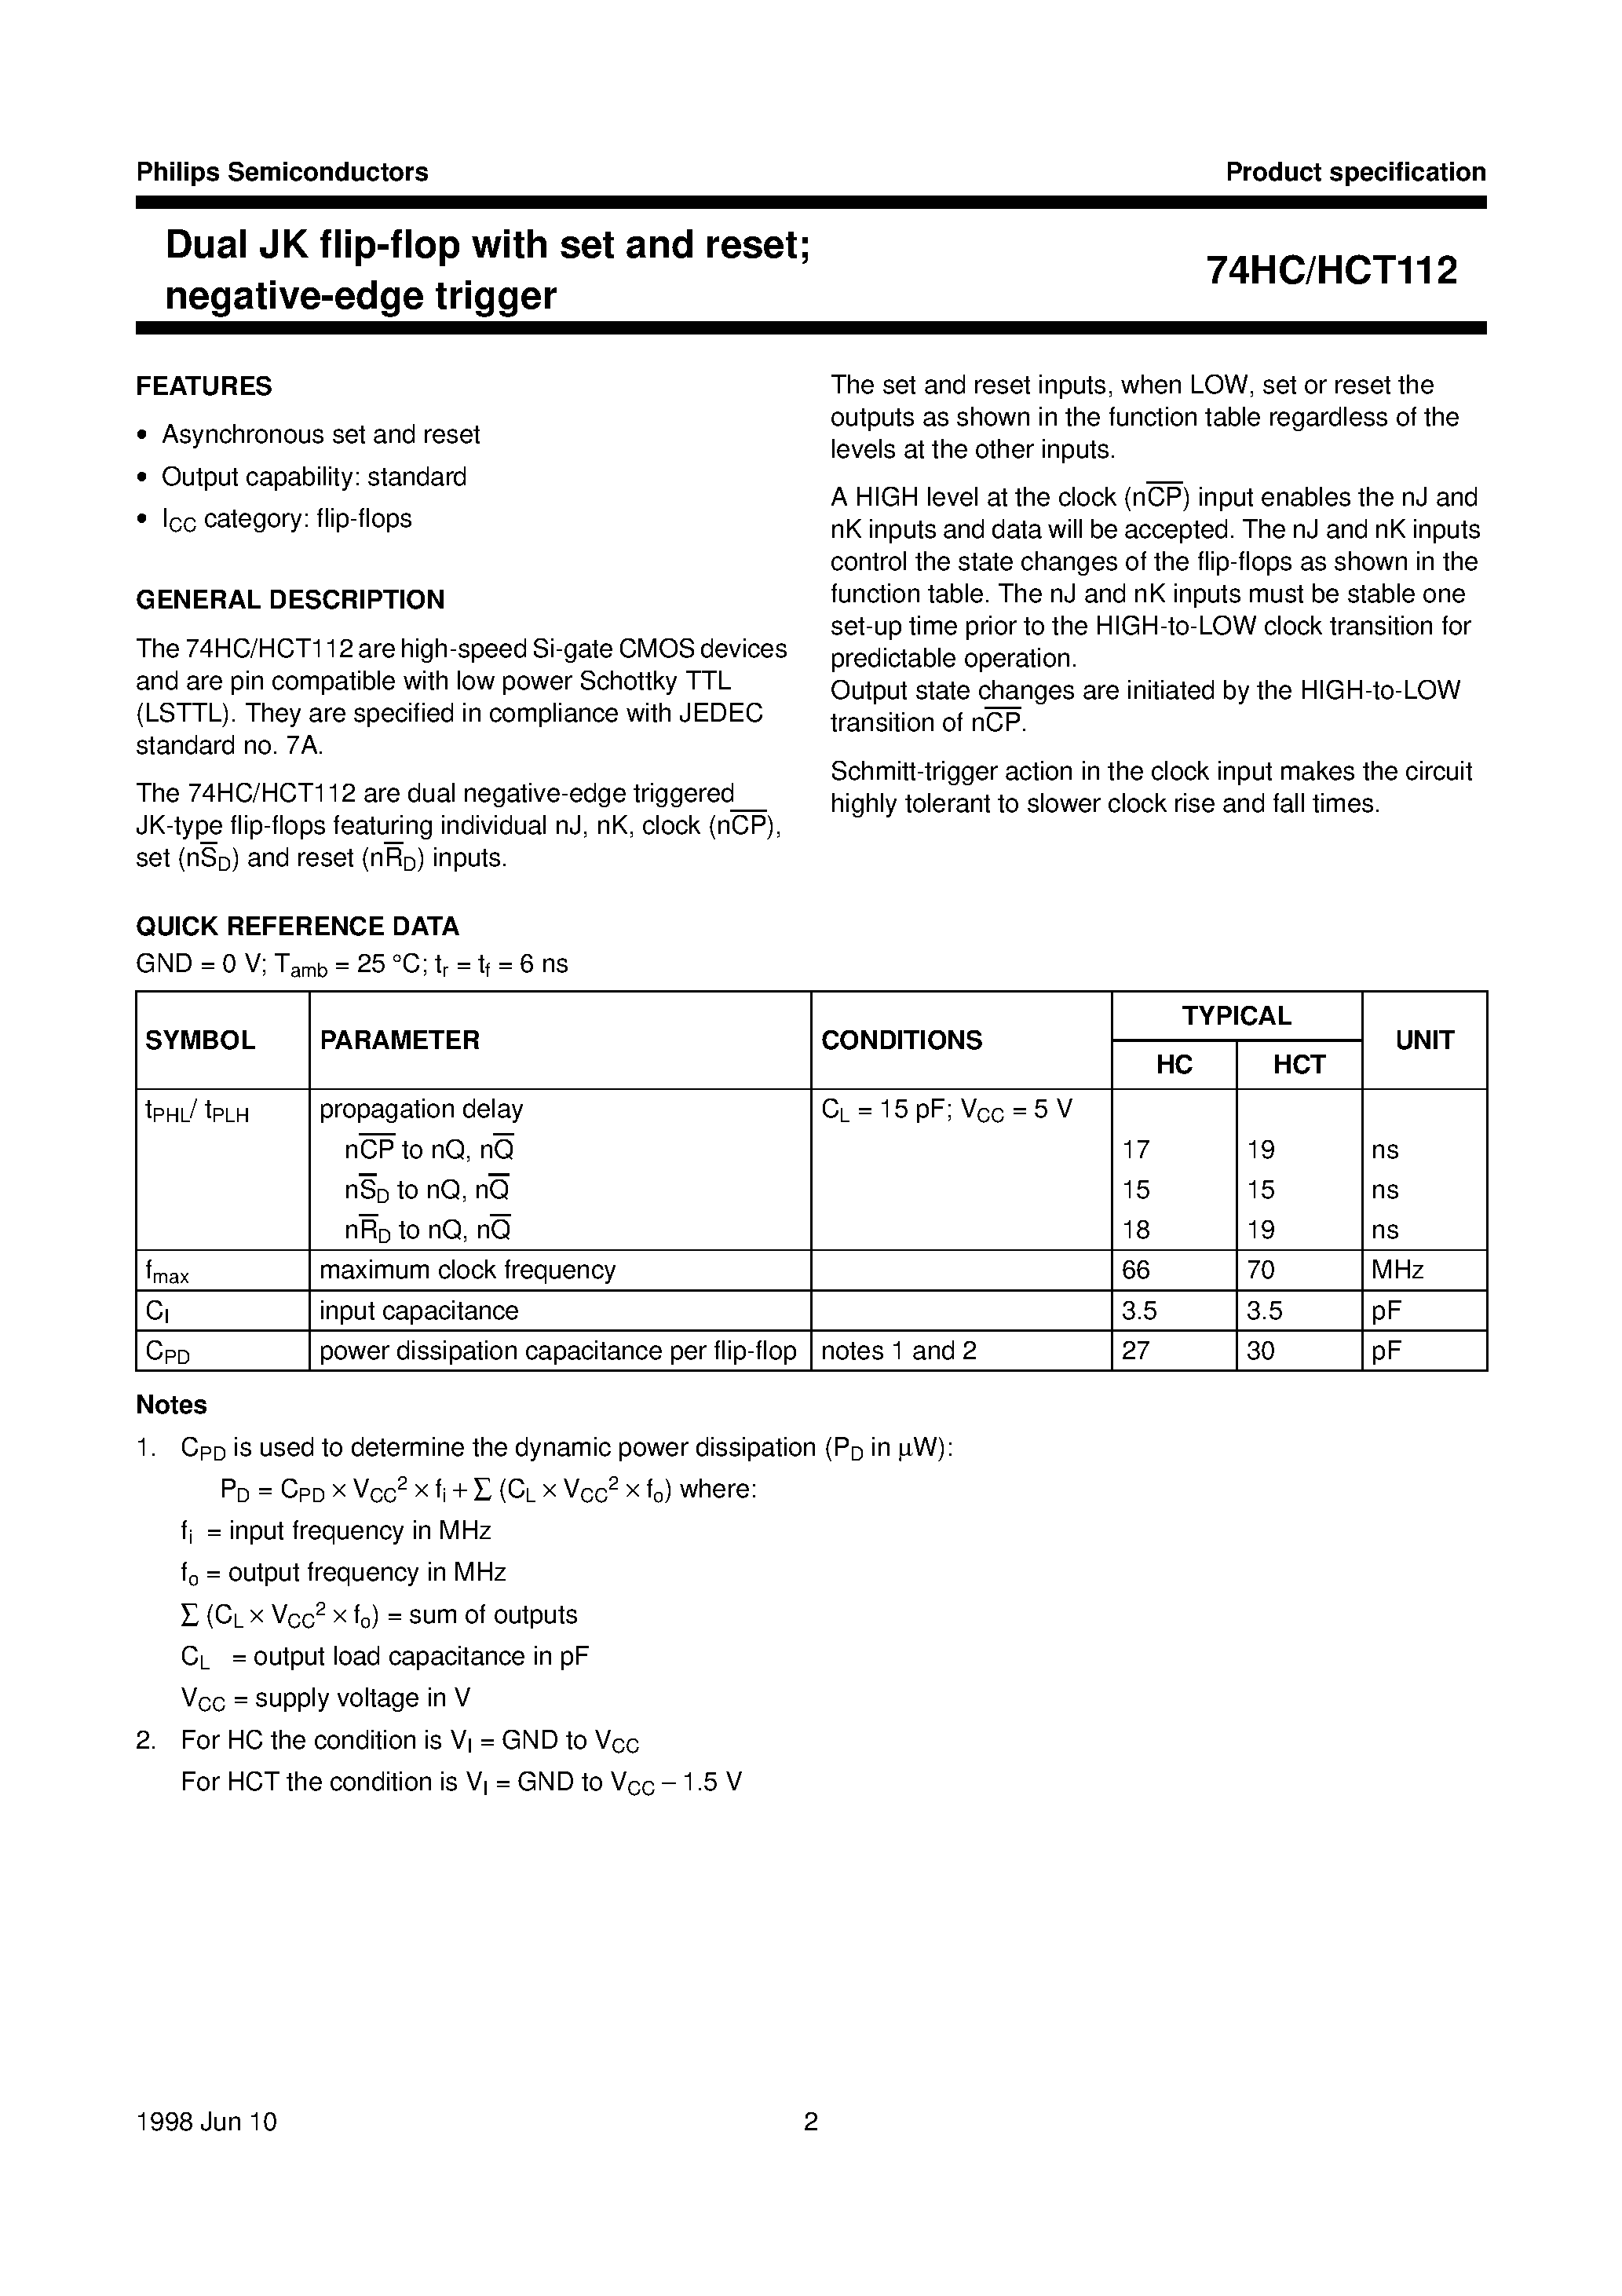 Datasheet 74HCT112 - Dual JK flip-flop with set and reset negative-edge trigger page 2